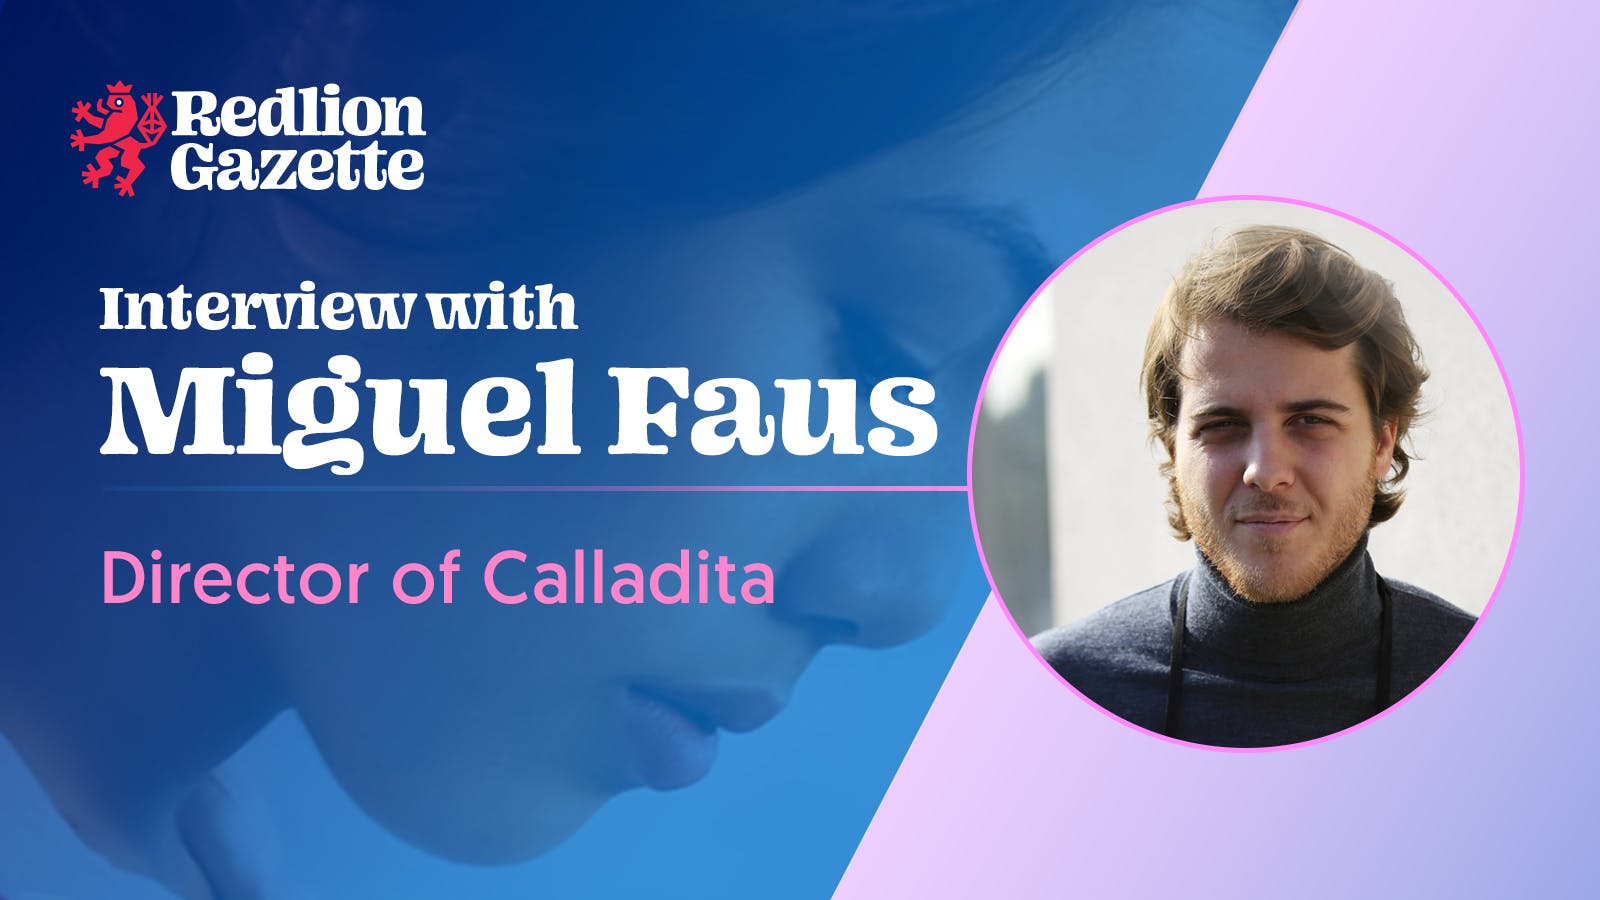 Interview with Calladita Director, Miguel Faus